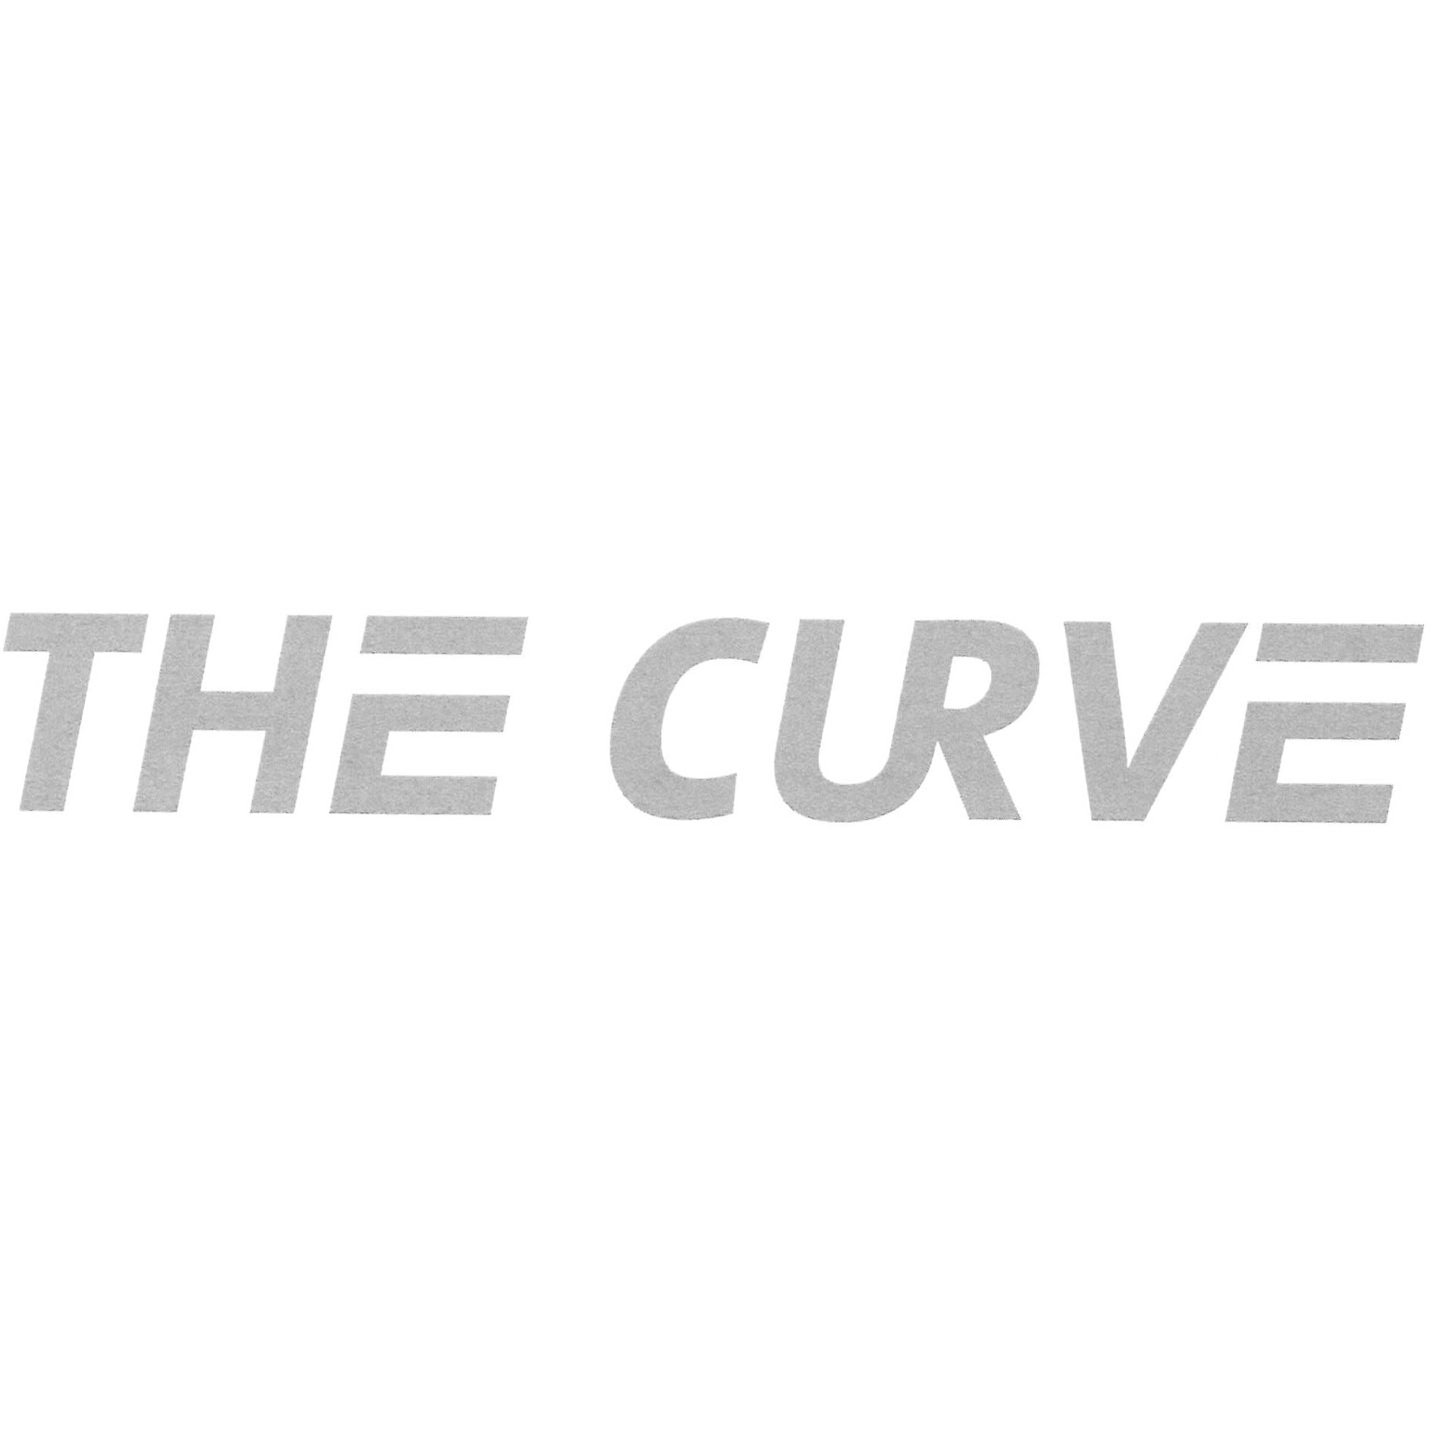 THE CURVE